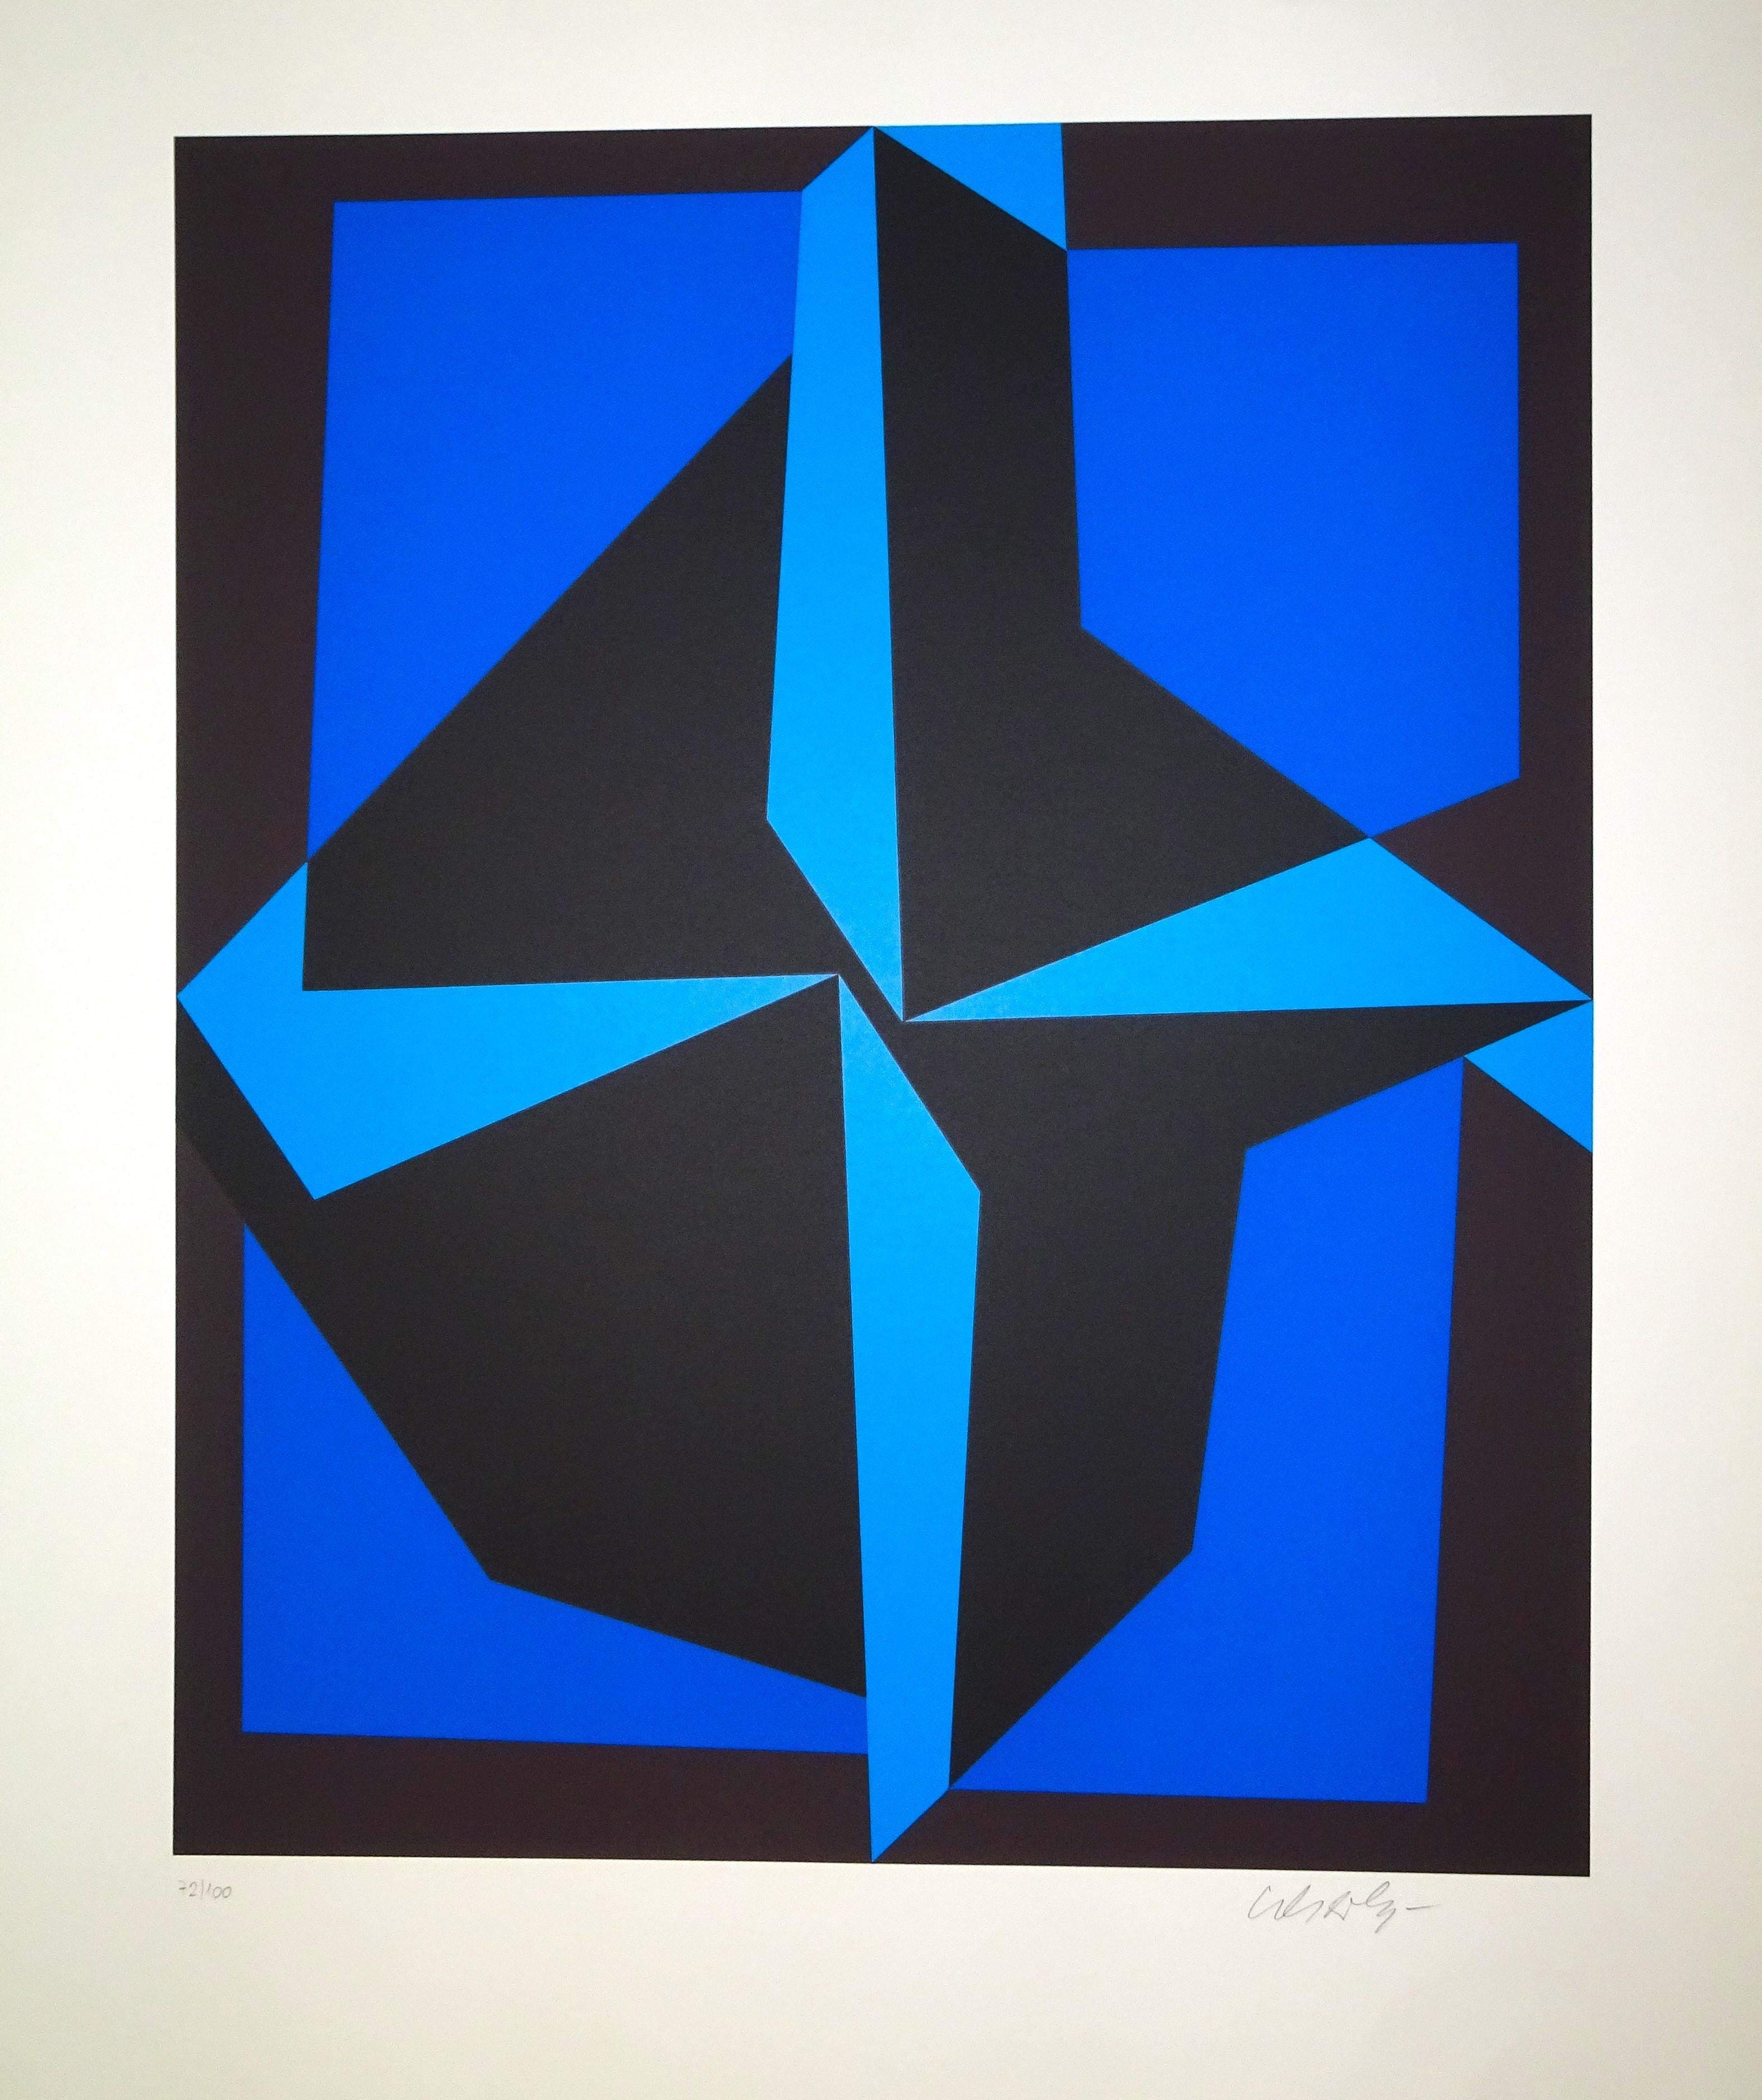 Mixed Blue Composition is a beautiful serigraph with a blue, light blue, and black abstract composition, realized by Victor Vasarely.
The plate is from the portfolio Les Années Cinquante edited by Pesti Mühely, Budapest, in 1989. Hand-signed by the